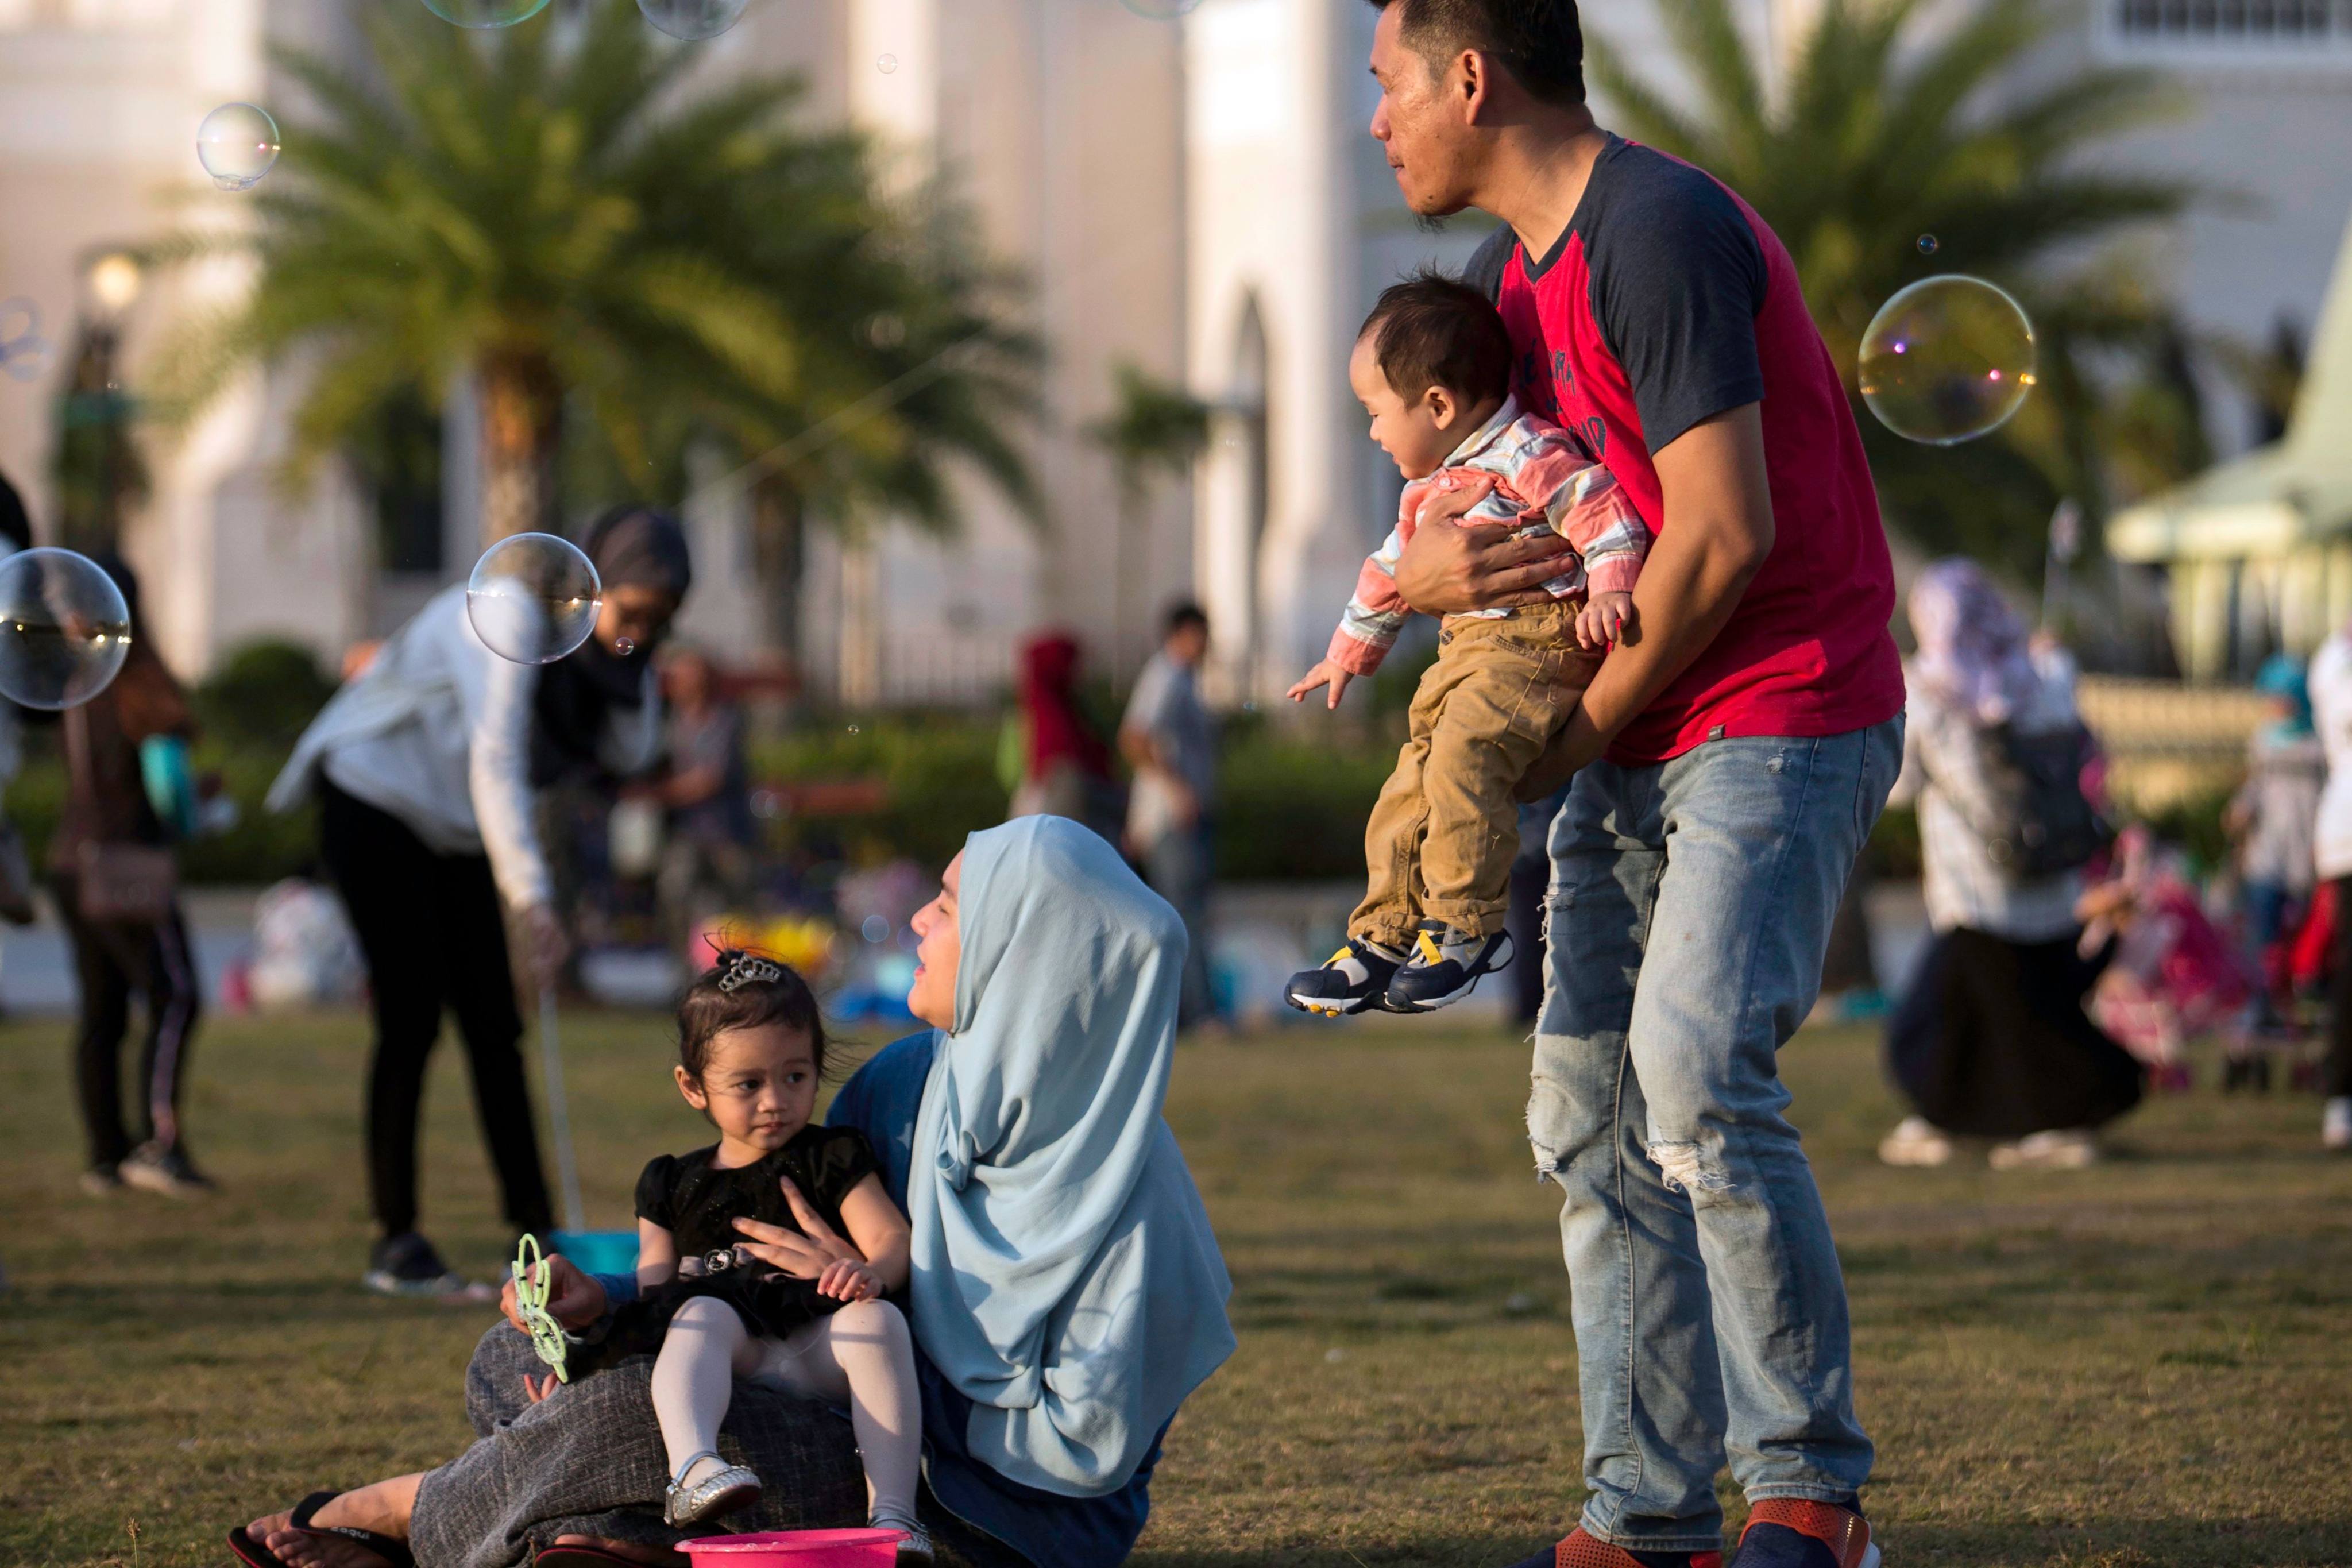 Families gather at Taman Mahkota Jubli Emas park in Bandar Seri Begawan, Brunei. Chinese workers based in the sultanate have few opportunities to mingle with the local community. Photo: AFP